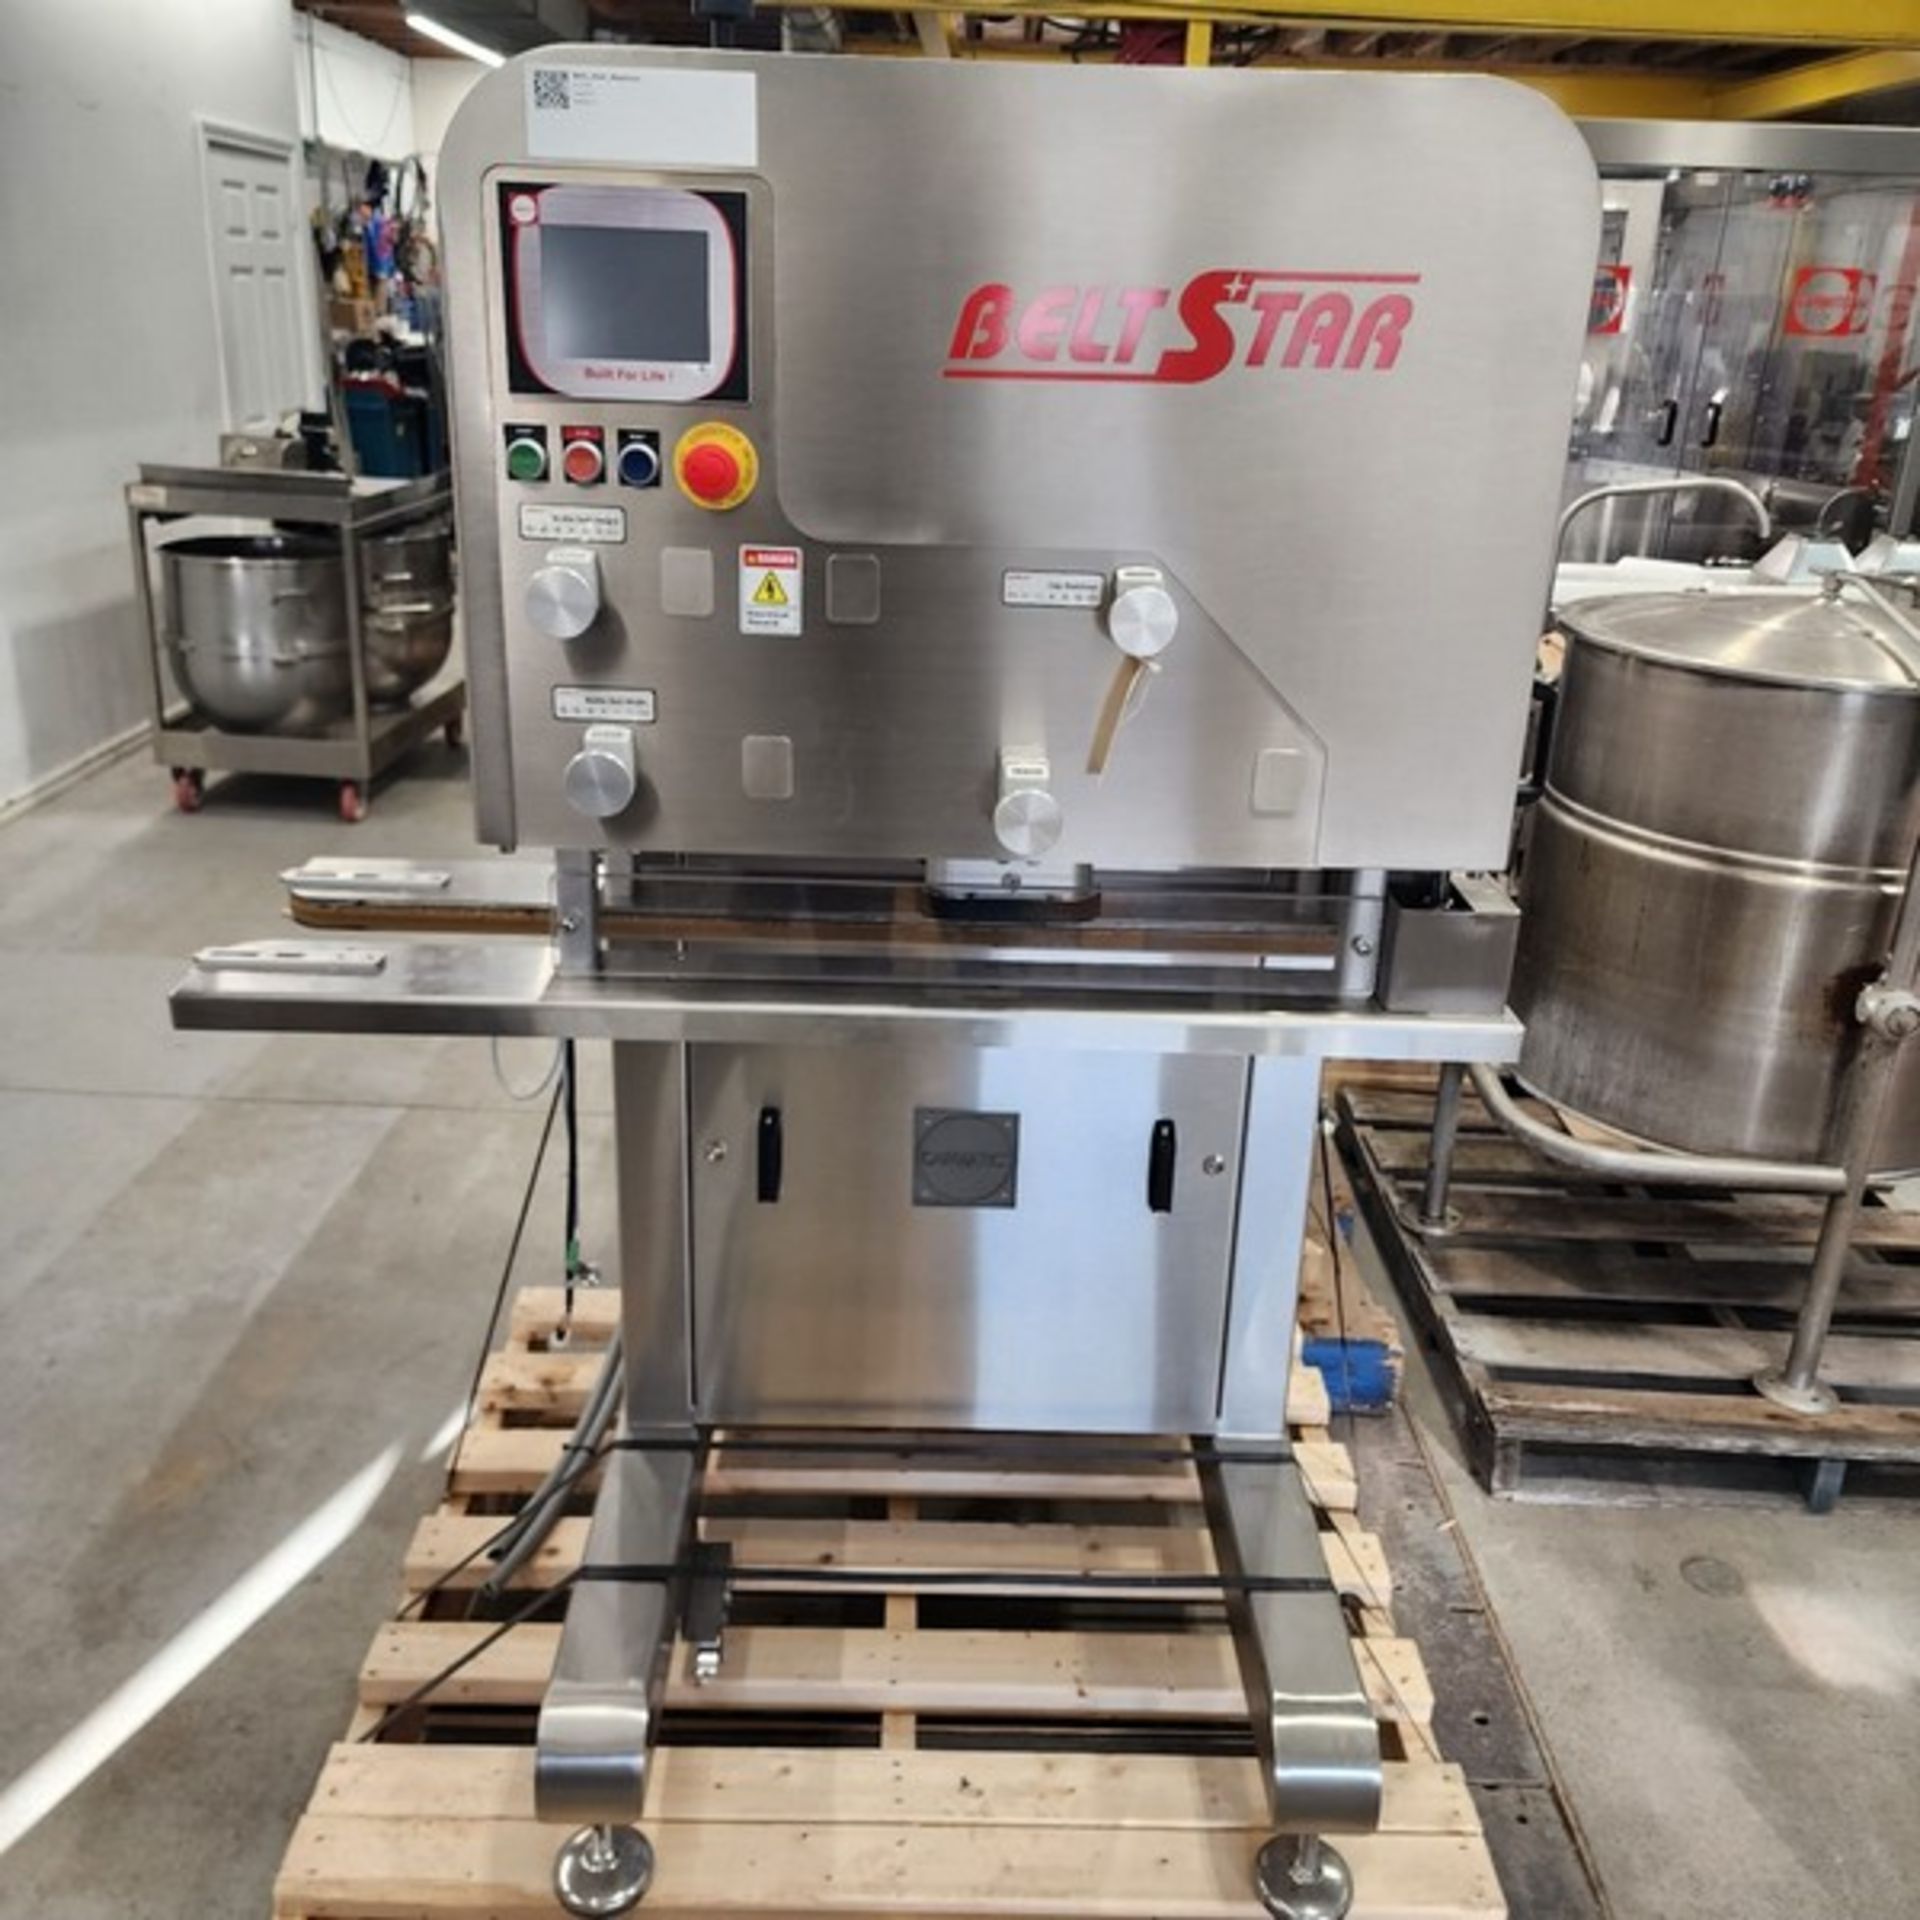 Beltstar torquer capper Servo torque high precision & effeiciency Made in Canada by capmatic. 2019 - Image 2 of 7